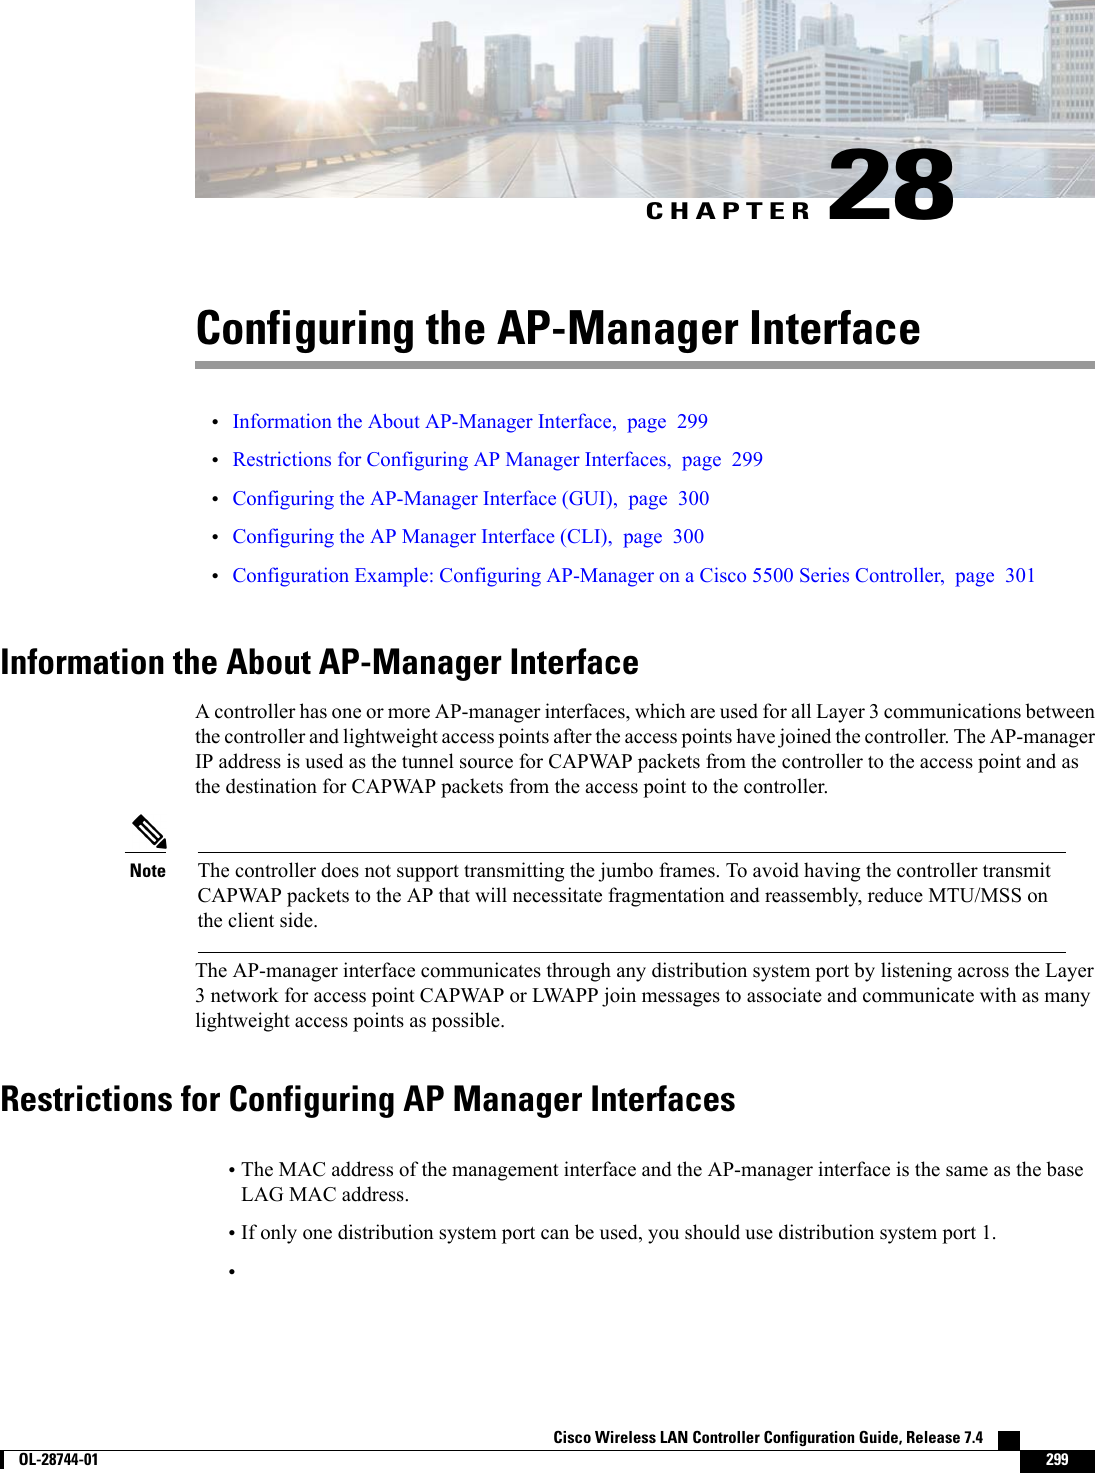 CHAPTER 28Configuring the AP-Manager Interface•Information the About AP-Manager Interface, page 299•Restrictions for Configuring AP Manager Interfaces, page 299•Configuring the AP-Manager Interface (GUI), page 300•Configuring the AP Manager Interface (CLI), page 300•Configuration Example: Configuring AP-Manager on a Cisco 5500 Series Controller, page 301Information the About AP-Manager InterfaceA controller has one or more AP-manager interfaces, which are used for all Layer 3 communications betweenthe controller and lightweight access points after the access points have joined the controller. The AP-managerIP address is used as the tunnel source for CAPWAP packets from the controller to the access point and asthe destination for CAPWAP packets from the access point to the controller.The controller does not support transmitting the jumbo frames. To avoid having the controller transmitCAPWAP packets to the AP that will necessitate fragmentation and reassembly, reduce MTU/MSS onthe client side.NoteThe AP-manager interface communicates through any distribution system port by listening across the Layer3 network for access point CAPWAP or LWAPP join messages to associate and communicate with as manylightweight access points as possible.Restrictions for Configuring AP Manager Interfaces•The MAC address of the management interface and the AP-manager interface is the same as the baseLAG MAC address.•If only one distribution system port can be used, you should use distribution system port 1.•Cisco Wireless LAN Controller Configuration Guide, Release 7.4        OL-28744-01 299